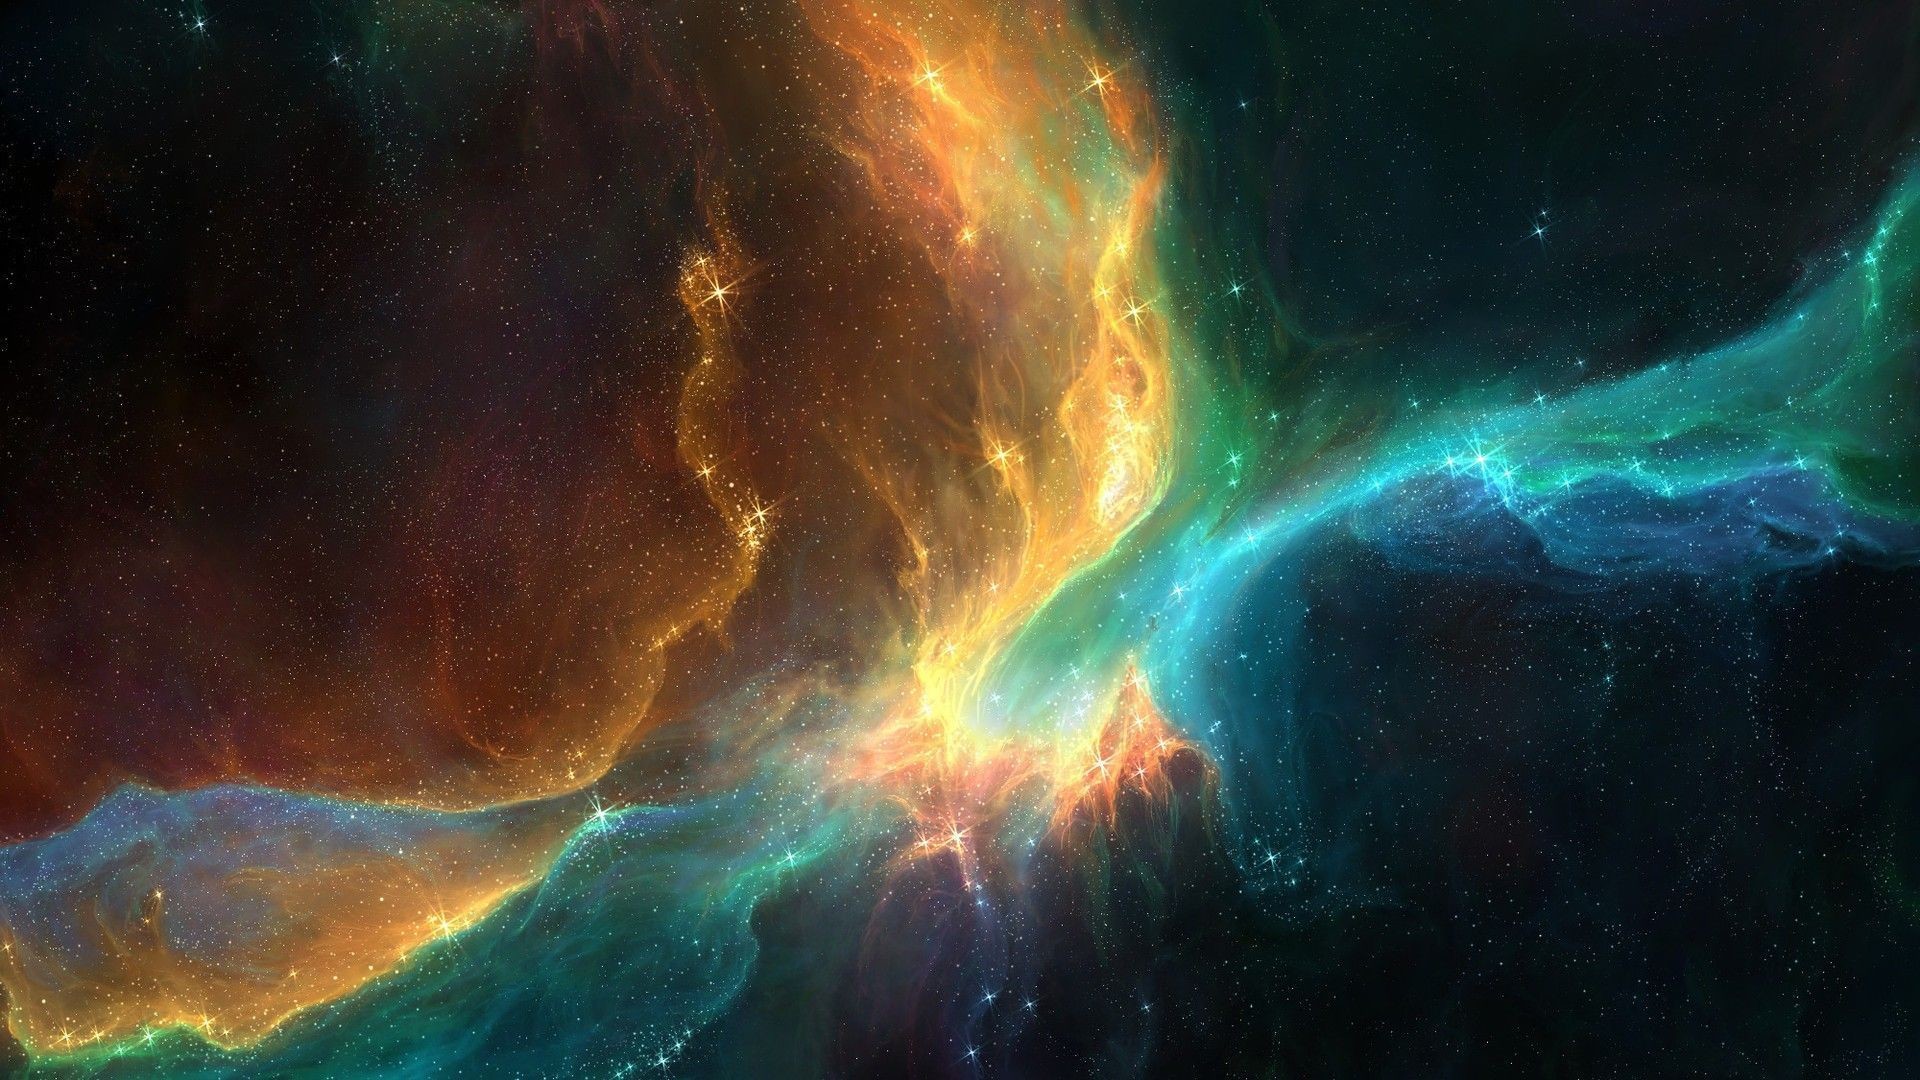 1920x1080 Windows space wallpaper - Outer Space Wallpaper. Download